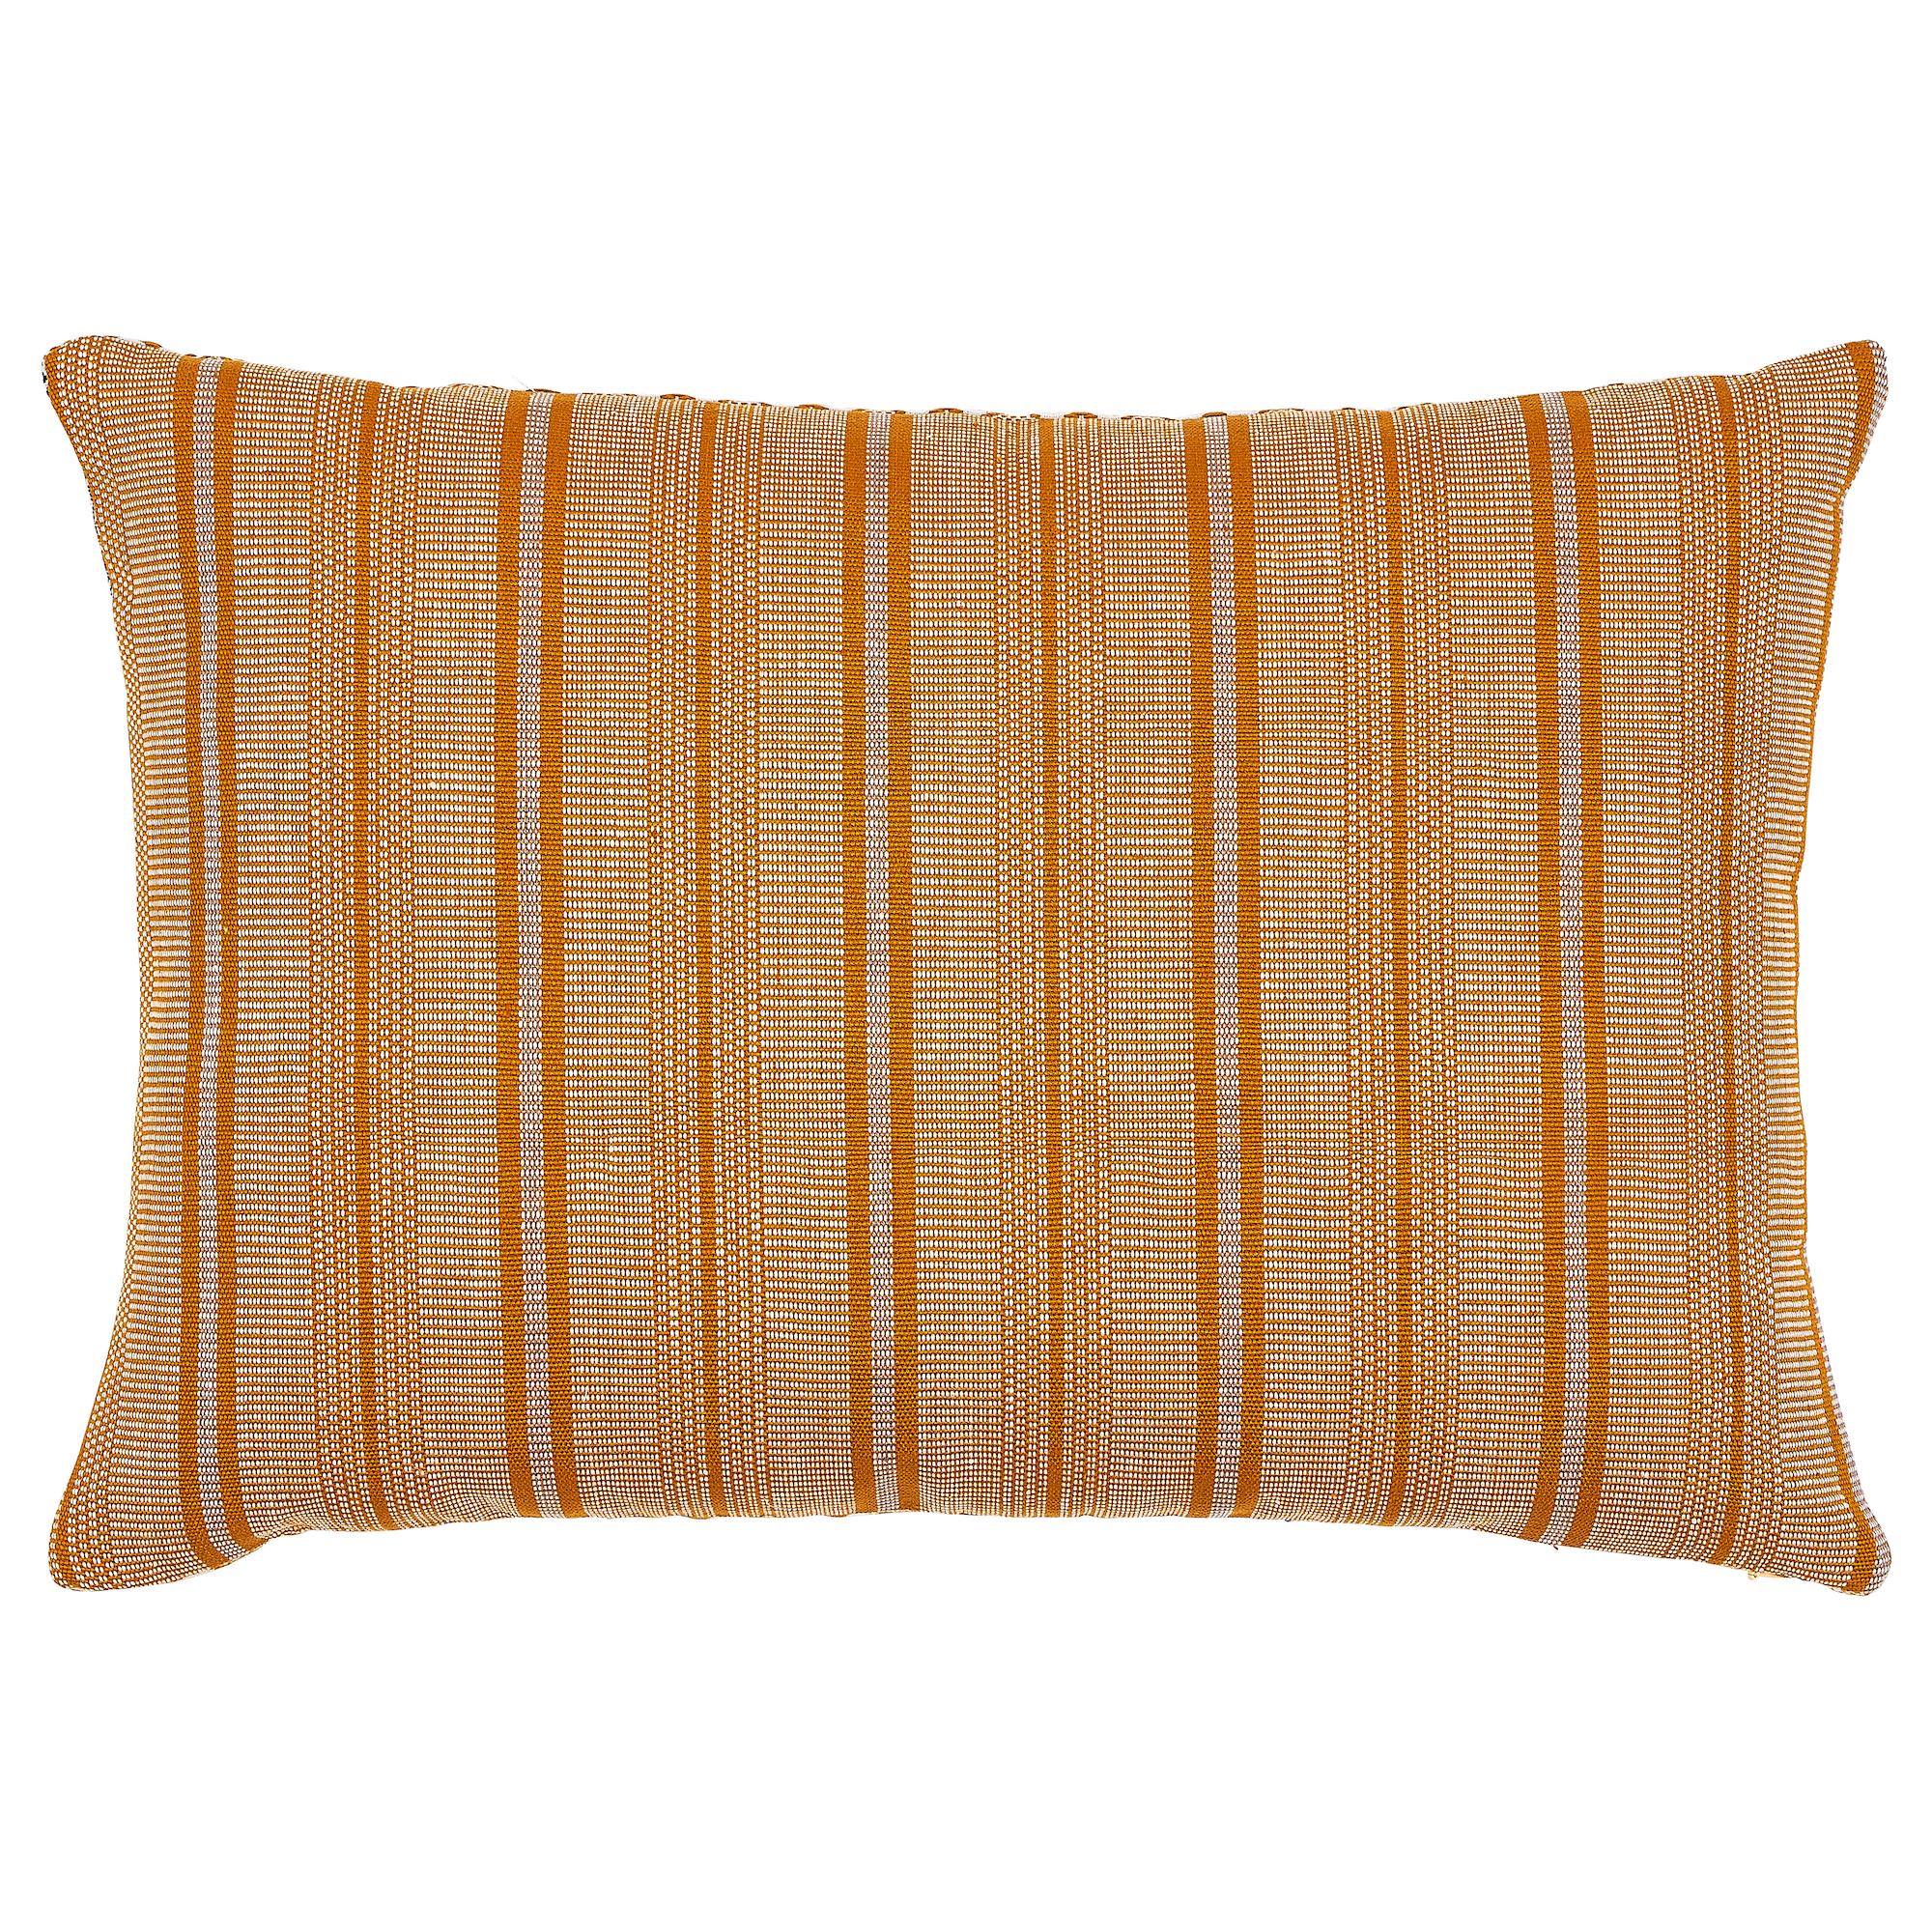 This pillow features Holmul by A Rum Fellow for Schumacher with a knife edge finish. A dazzling multicolored pattern, ethically handwoven in Guatemala with a centuries-old, treadle-loom technique. The artisanal nature of this textile gives it a